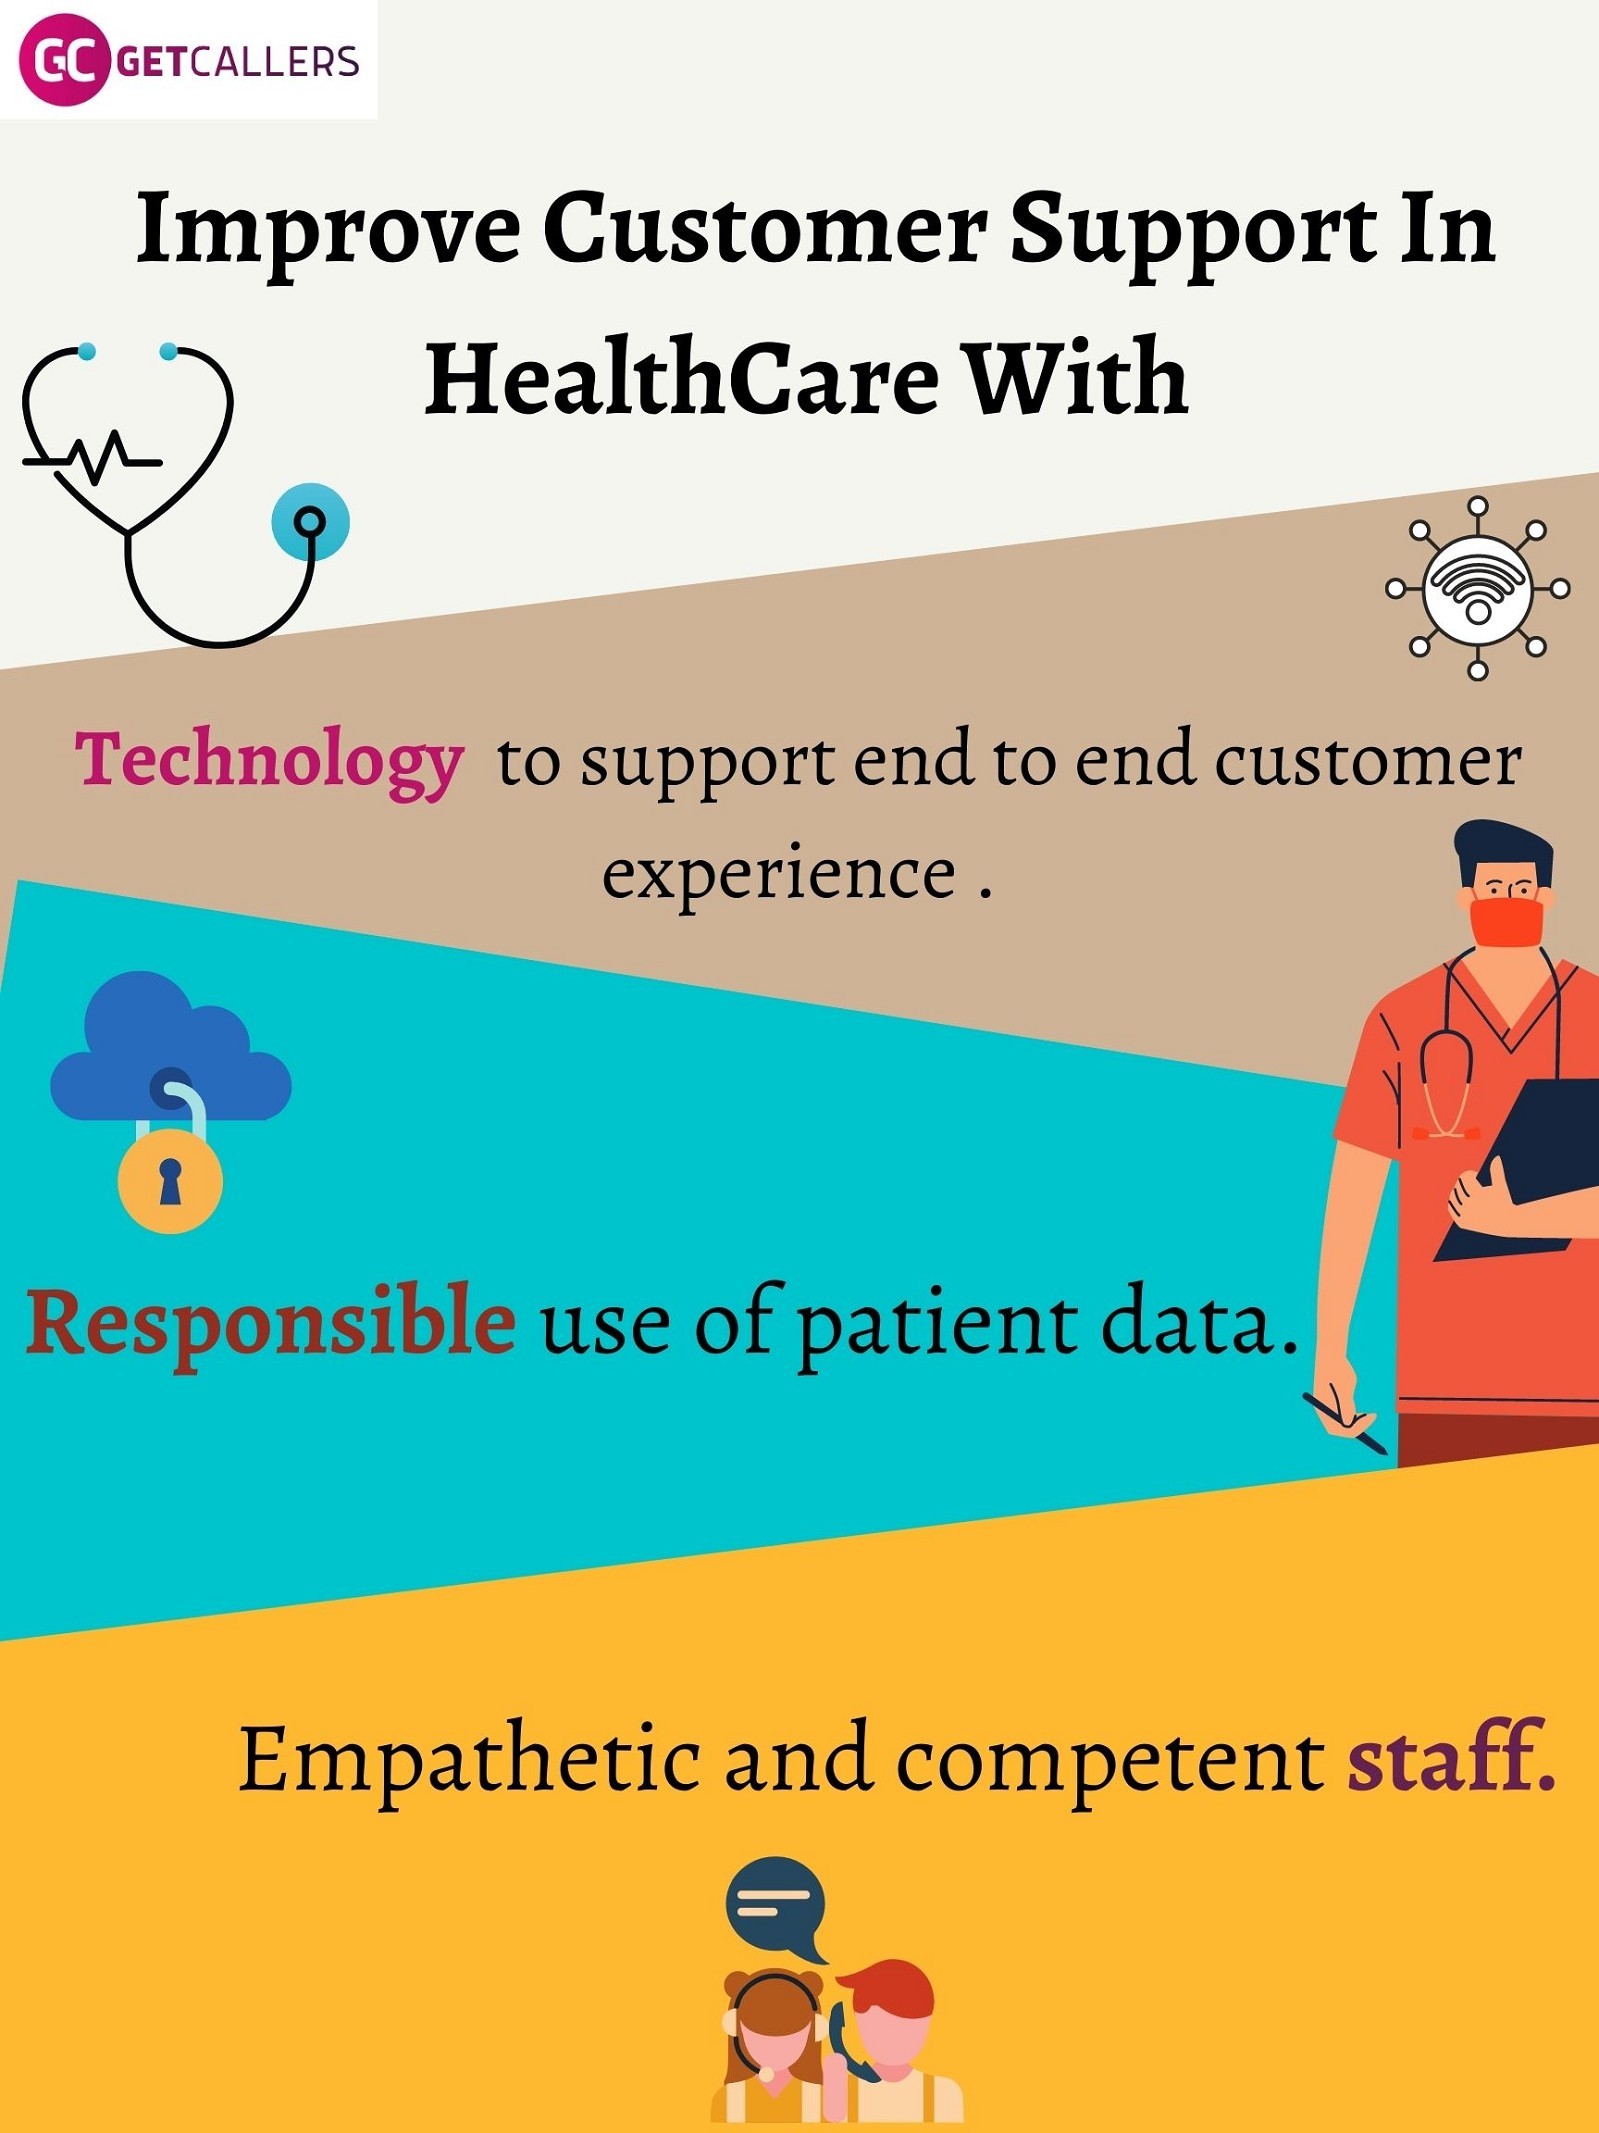 Improve Your Customer Support In HealthCare With GetCallers